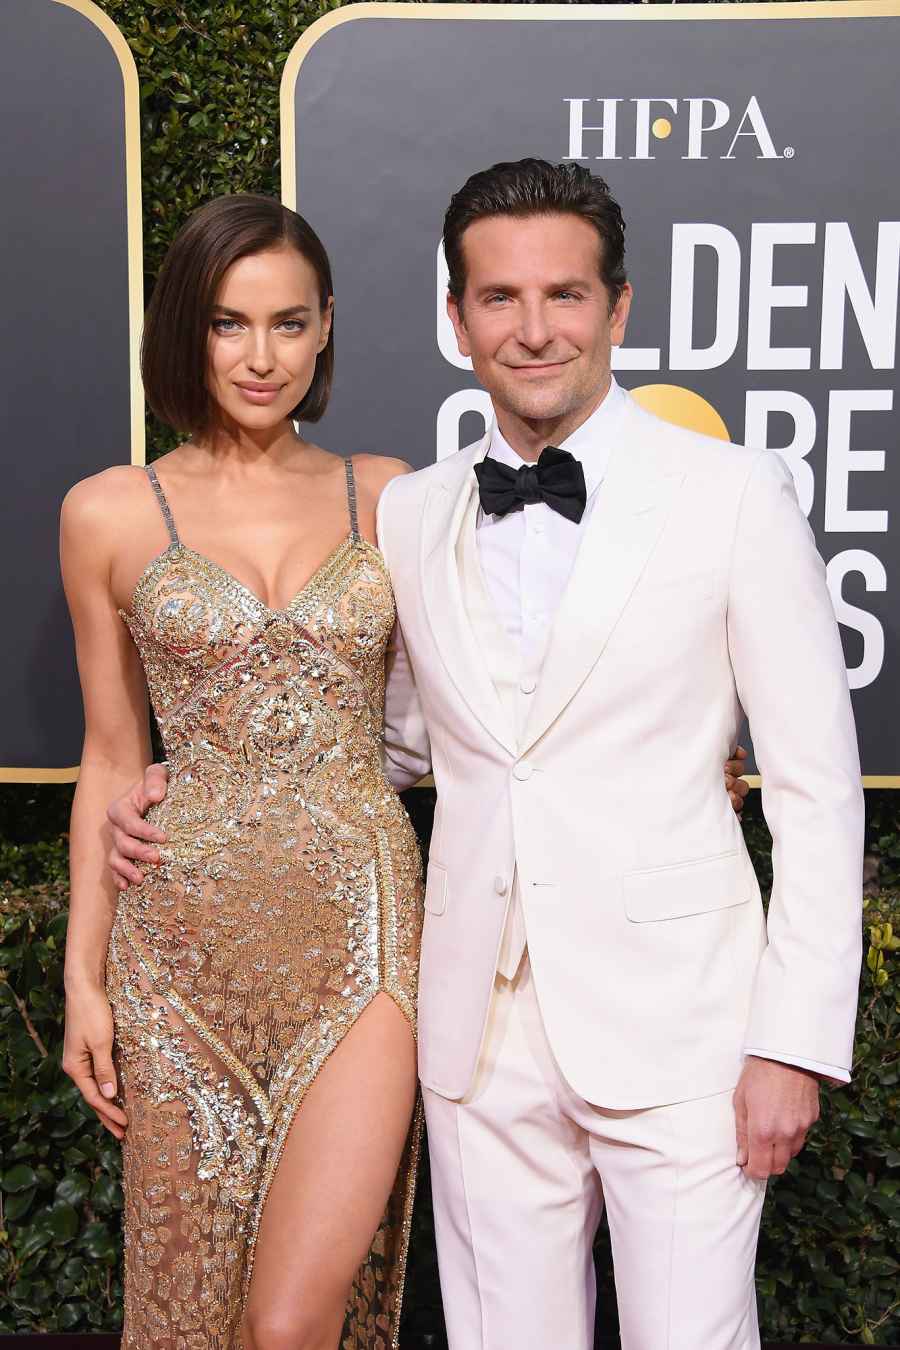 Bradley Cooper and Irina Shayk: A Timeline of Their Private Romance